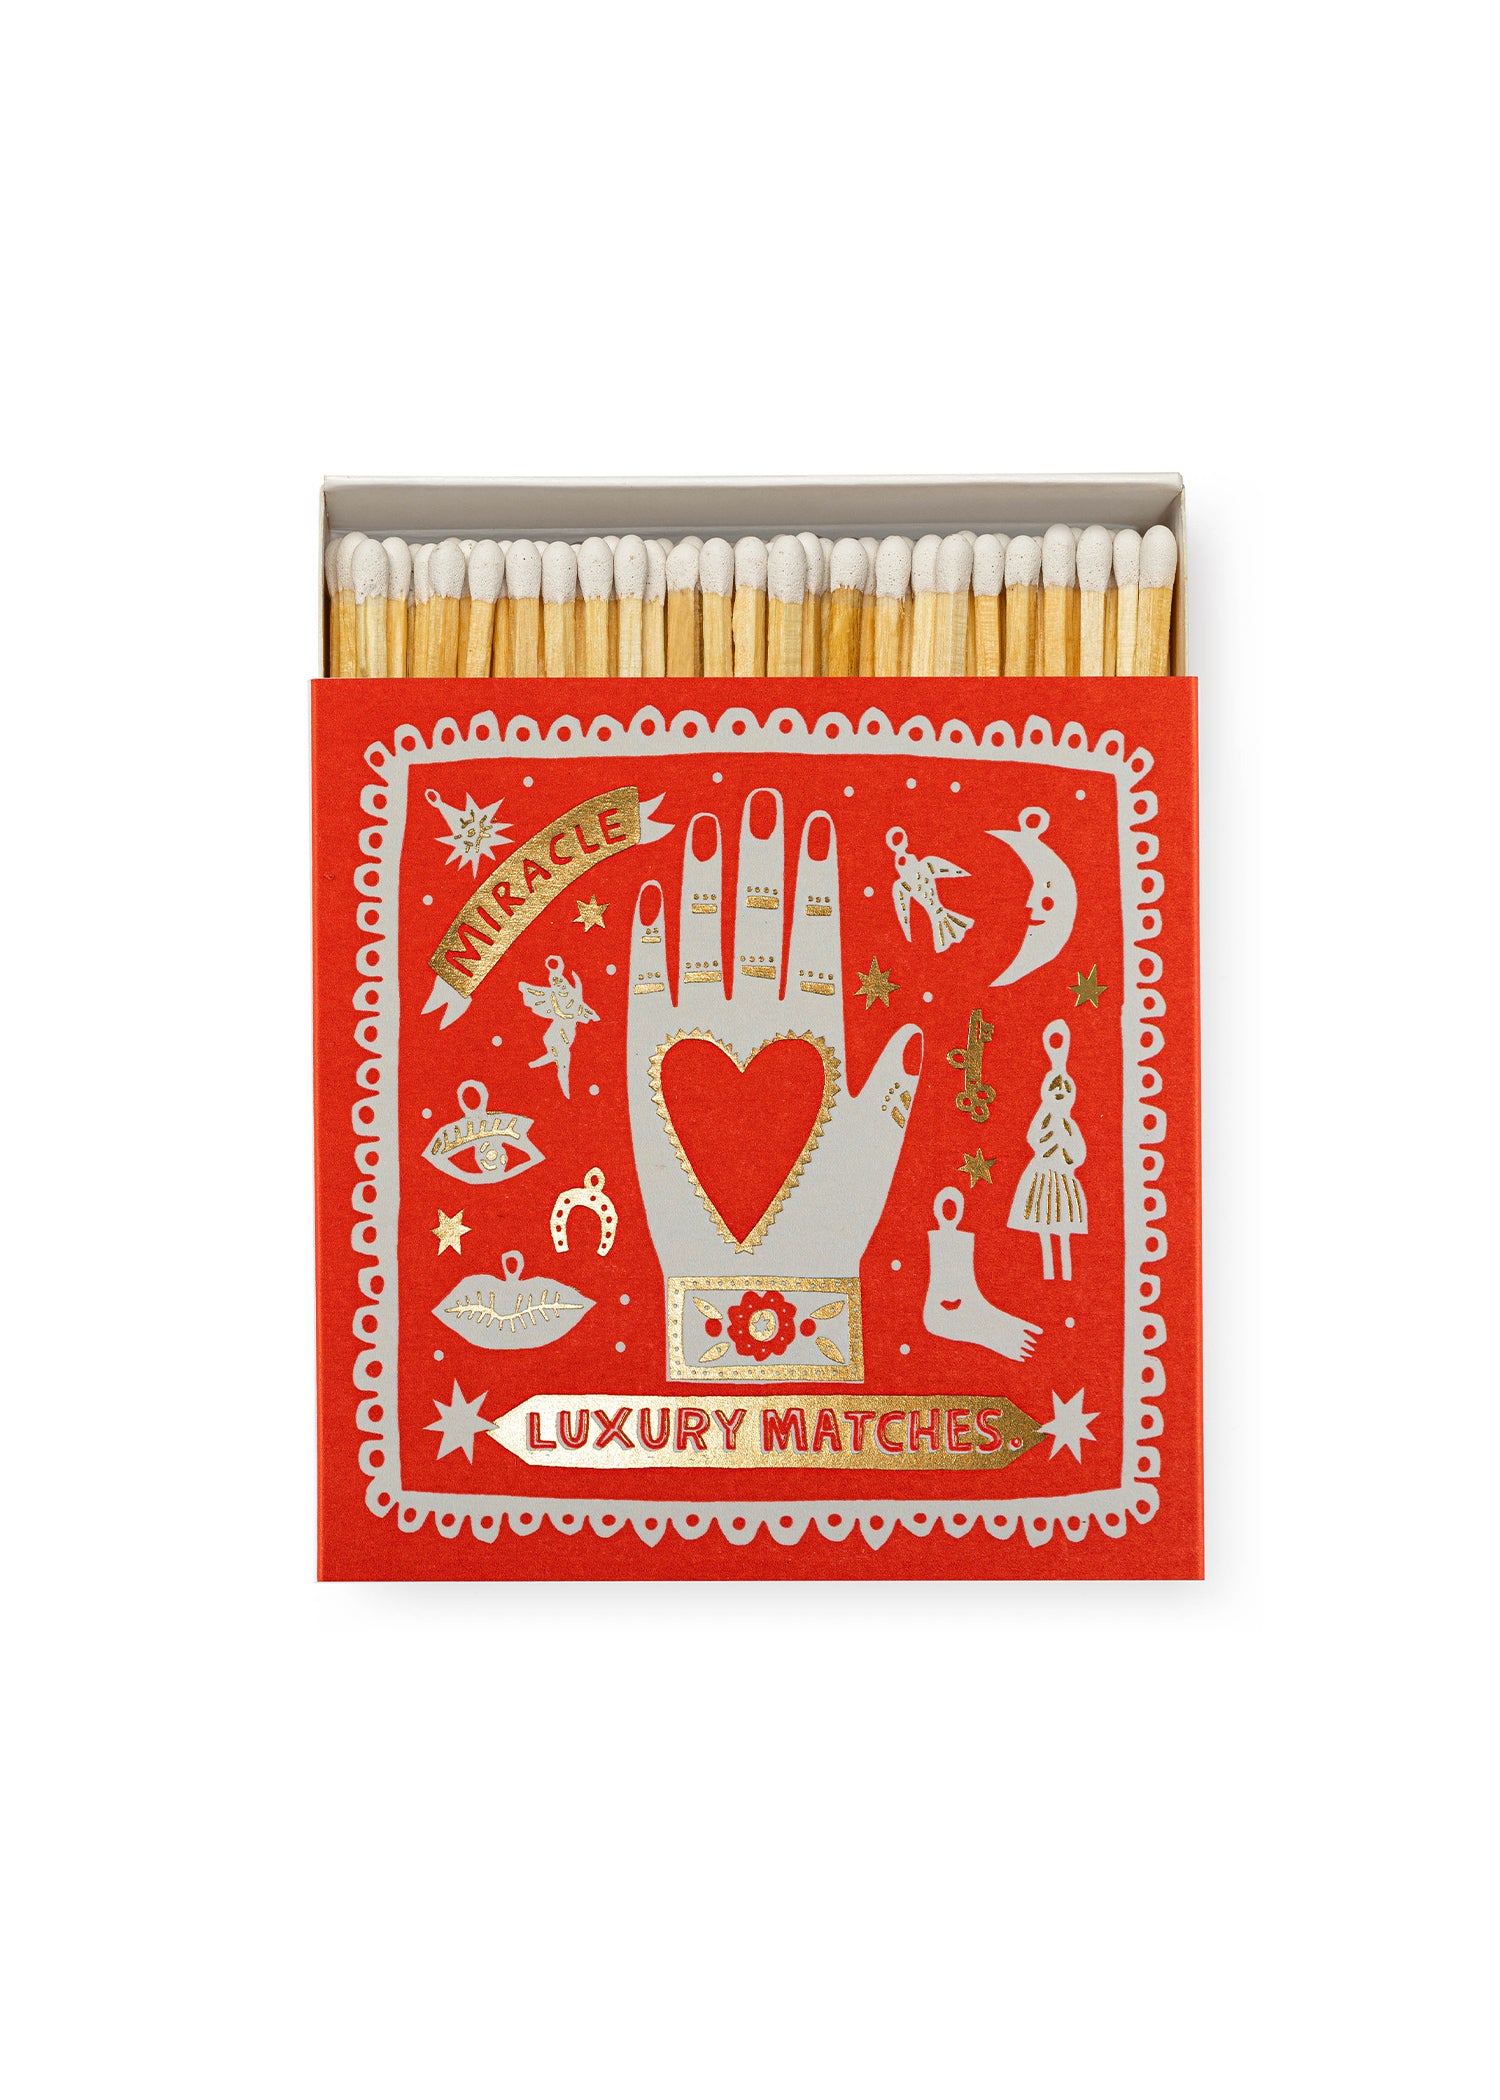 The Archivist Gallery Miracle Luxury Lucifers Matches